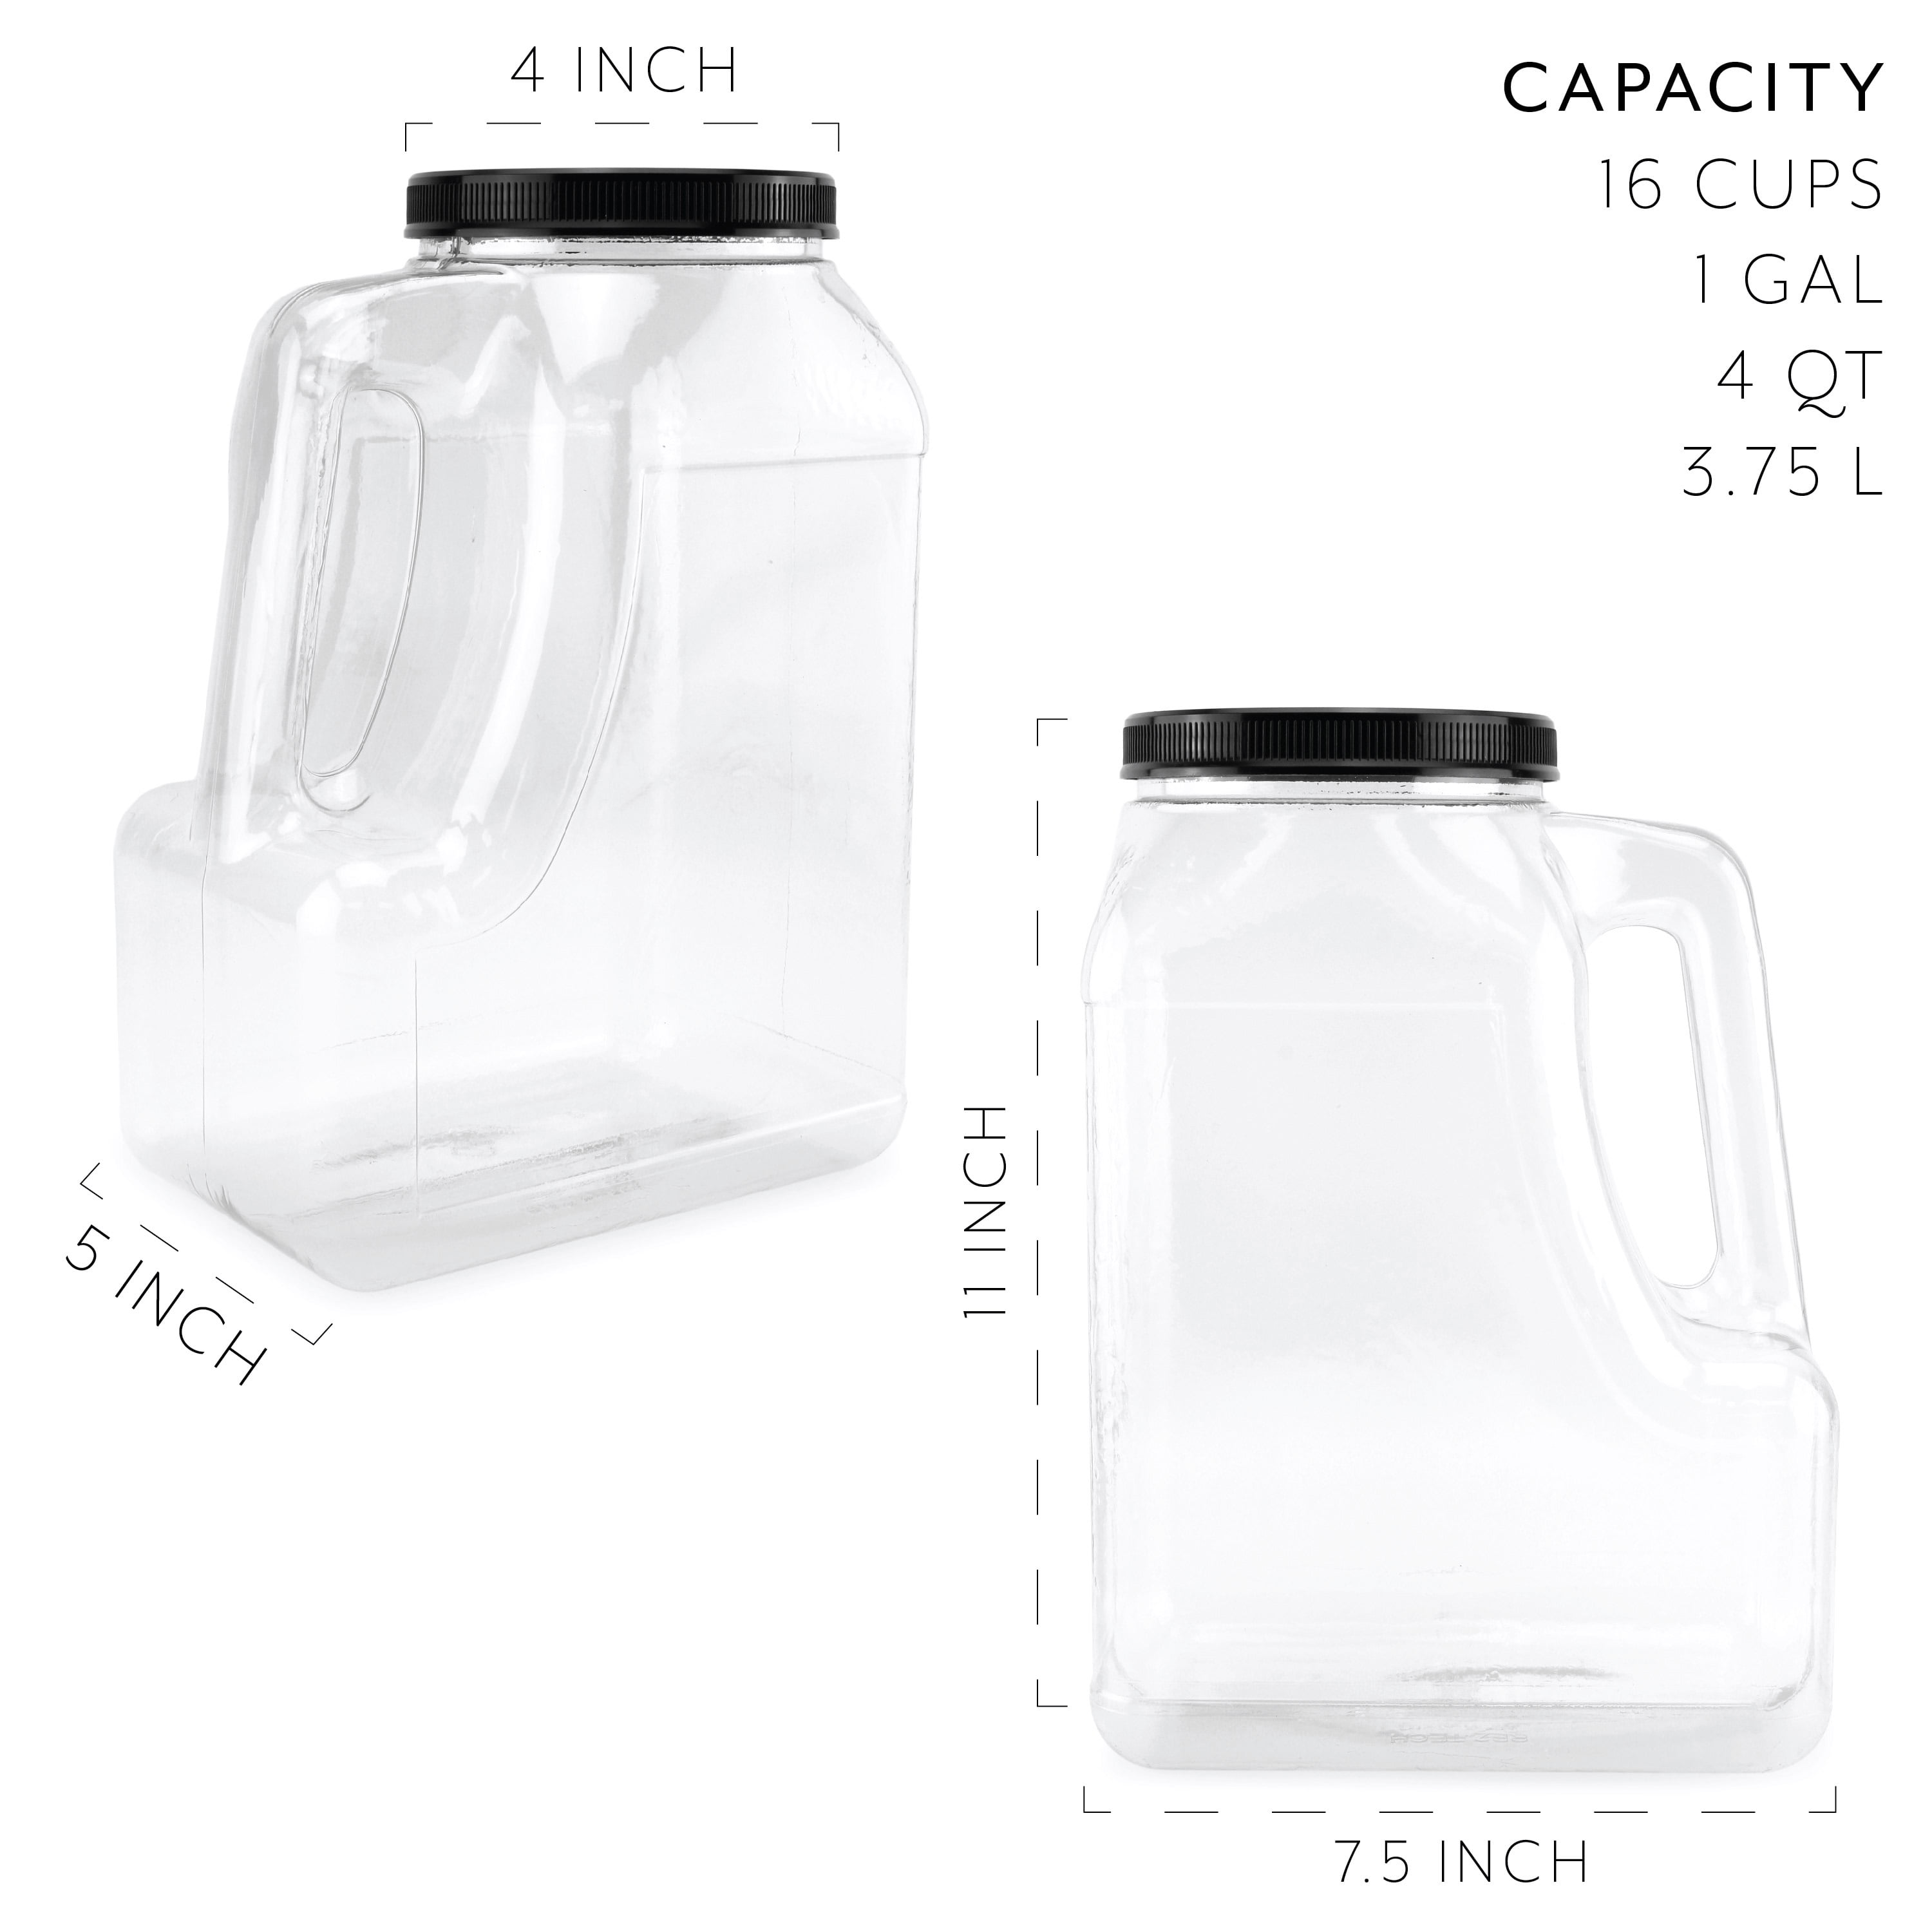 Elsjoy 2 Pack 1.3 Gallon Plastic Jars, Plastic Gallon Containers with Lids,  Large Square Plastic Food Storage Jar for Kitchen, Dry Food, Snack